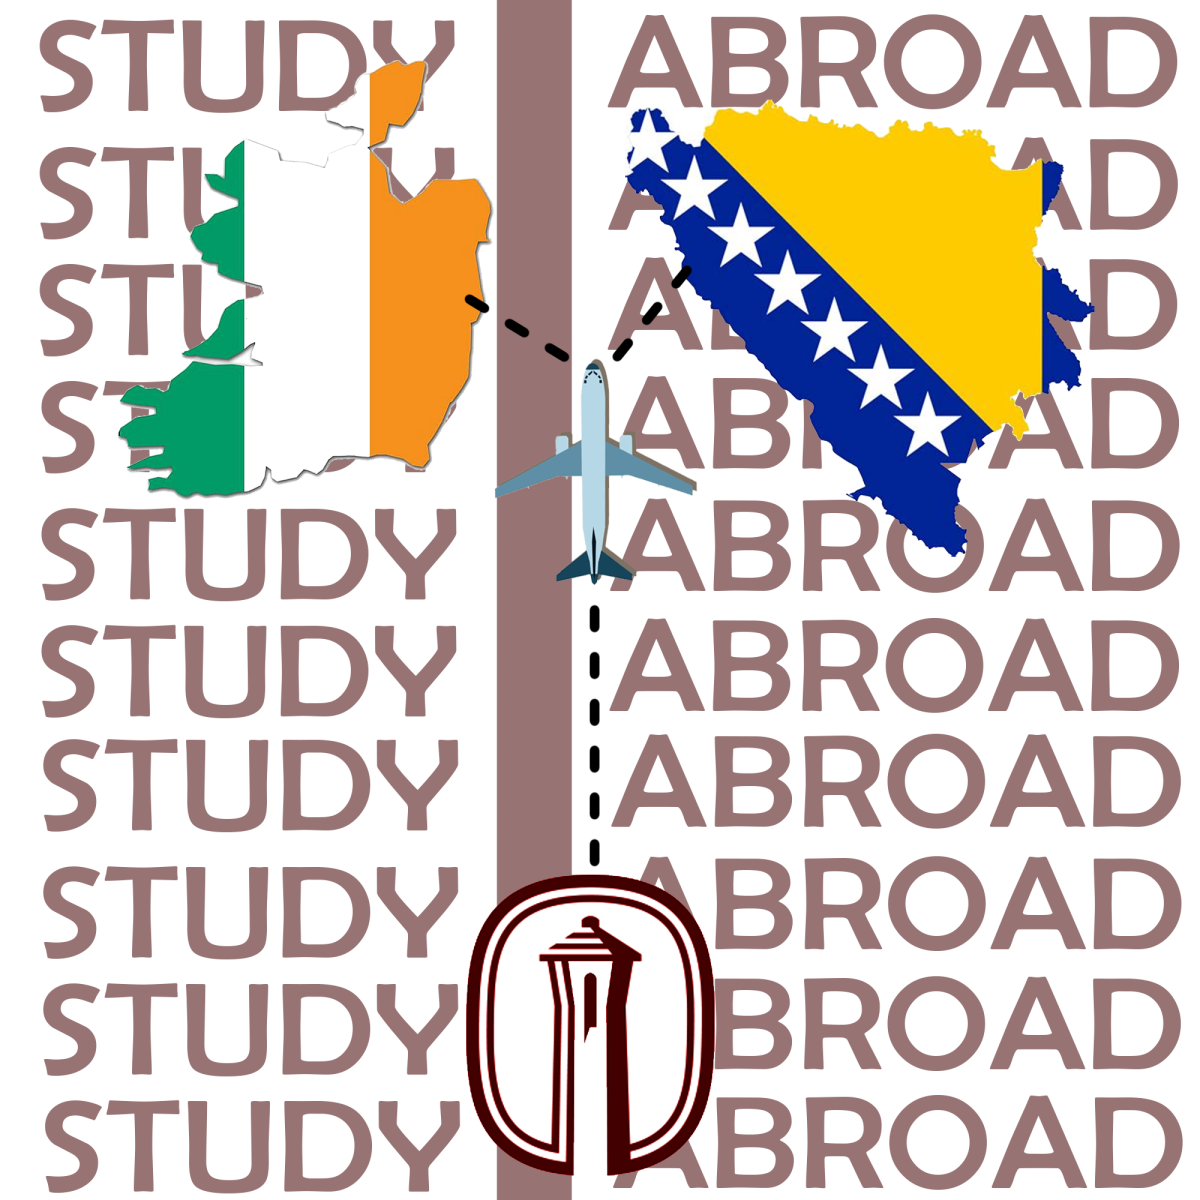 Around+the+world%3A+High+expectations+for+study+abroad+trips